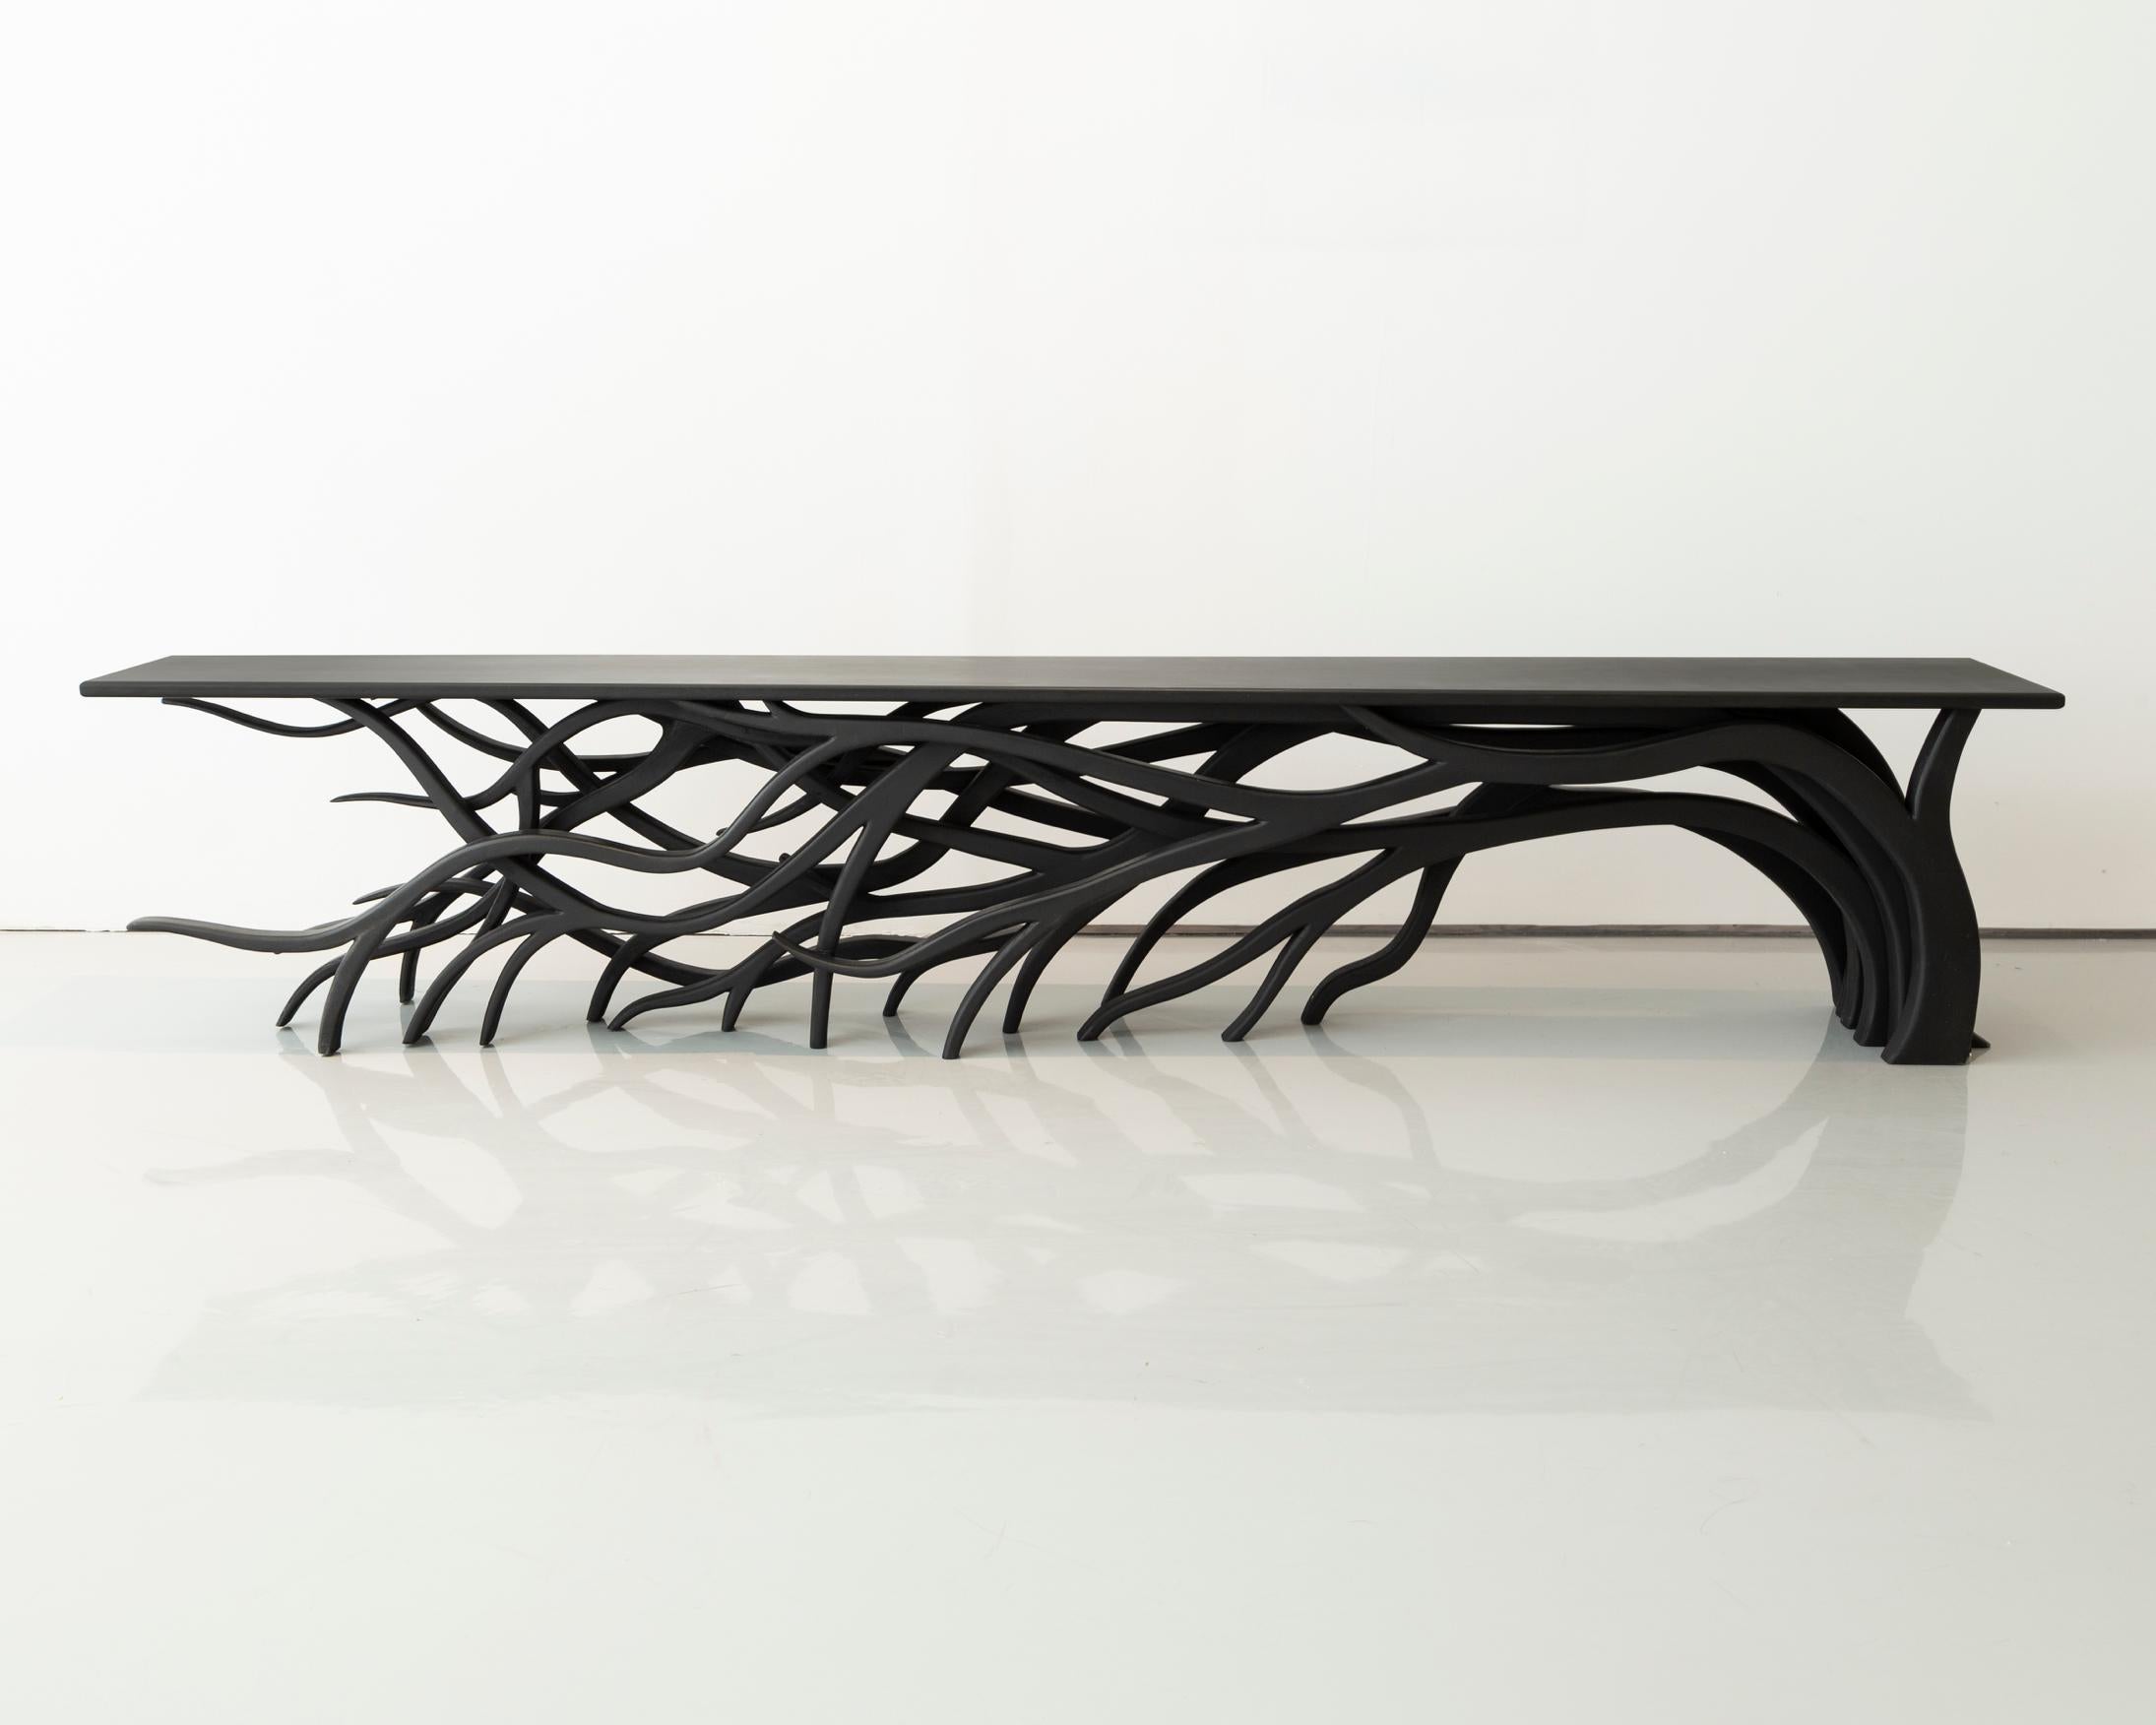 Sebastian Errazuriz. Metamorphosis bench. Carved lacquered plywood. USA, 2018. Number 1 from the edition of 8 + 2APs.